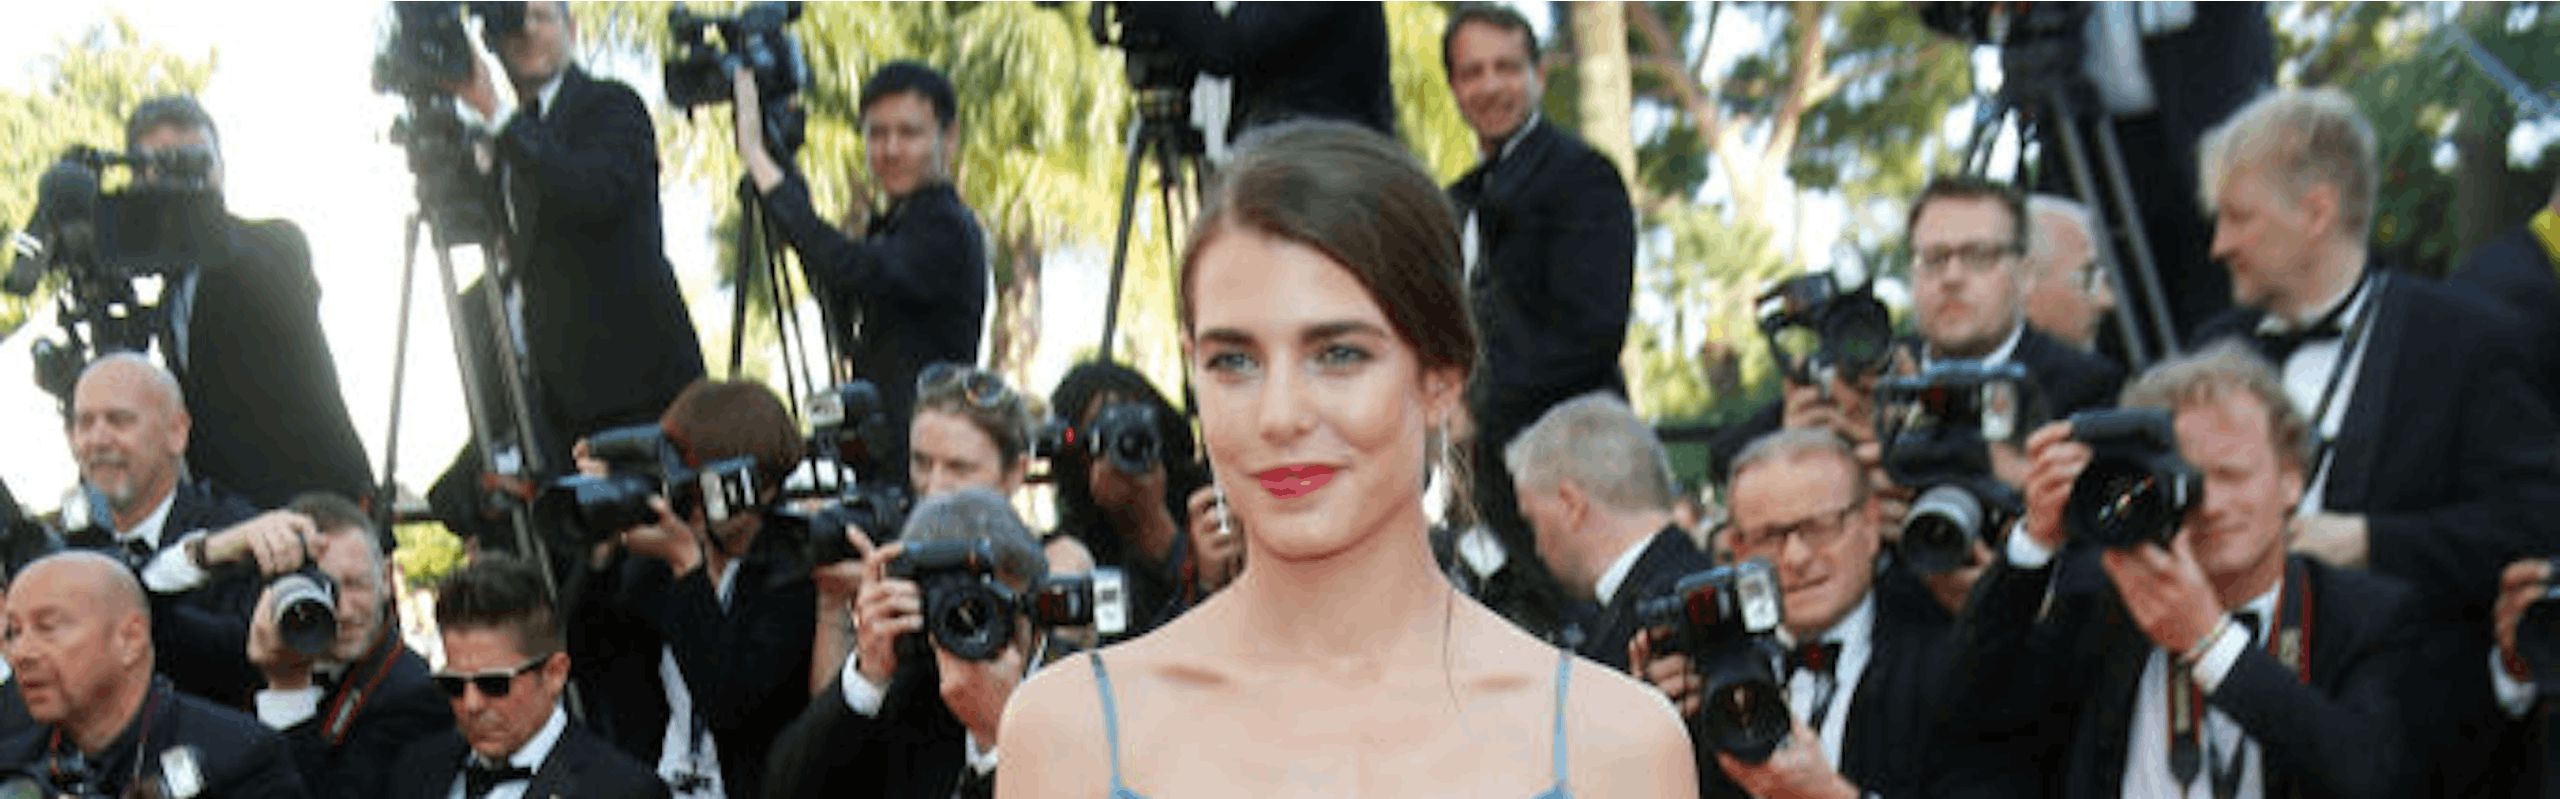 Charlotte Casiraghi (Foto: Getty Images)